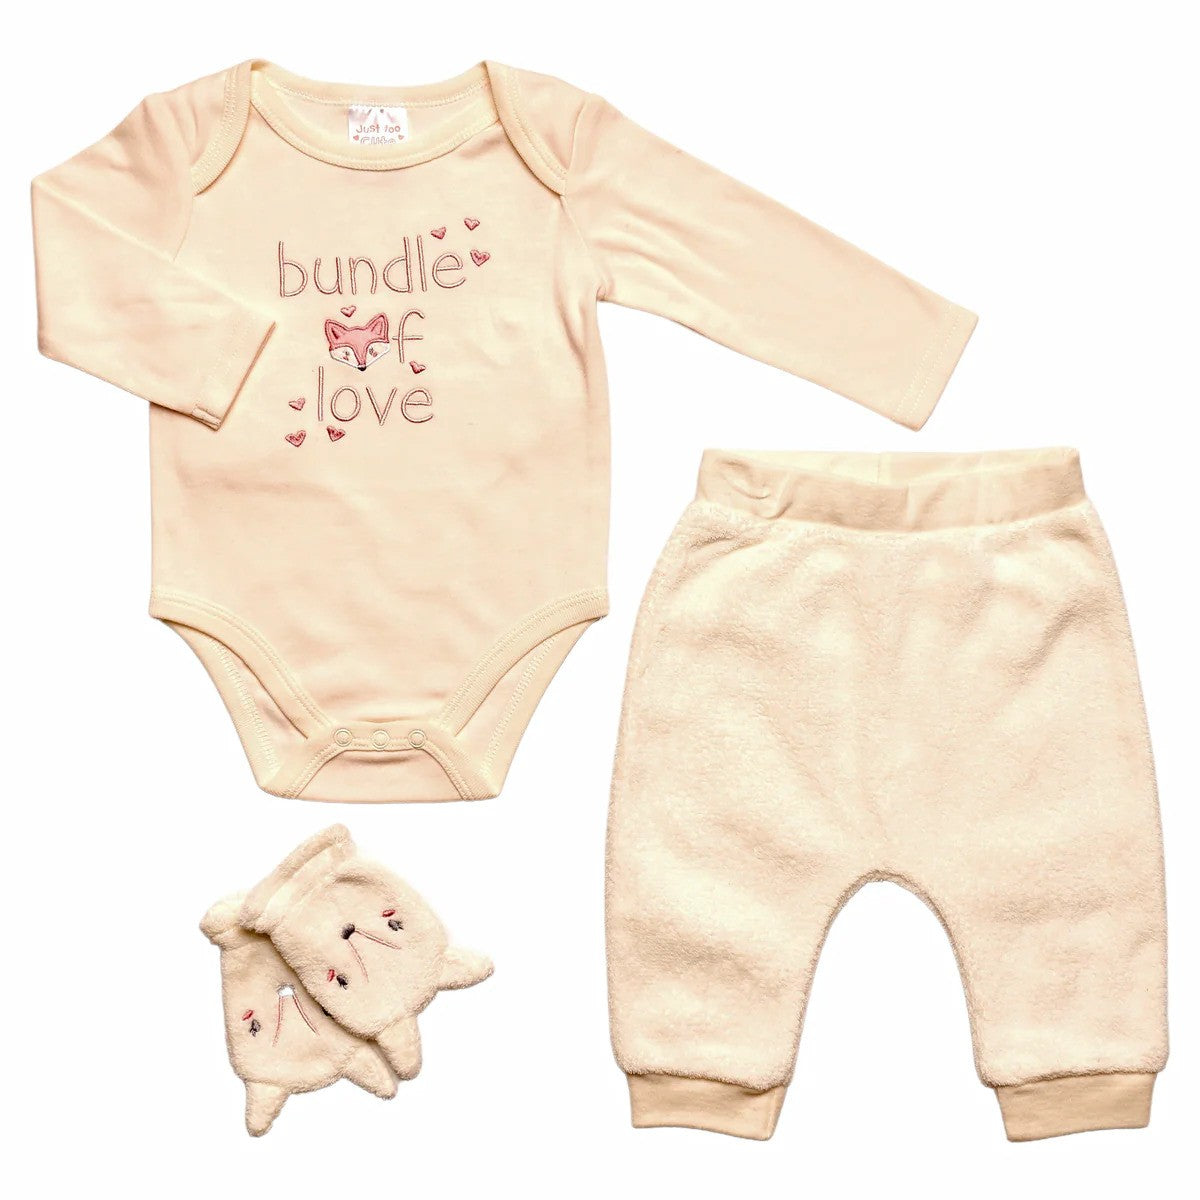 Cream baby clothing set with pink fox embroidery and wording that reads 'bundle of love'. Includes a bodysuit, trousers, and mittens